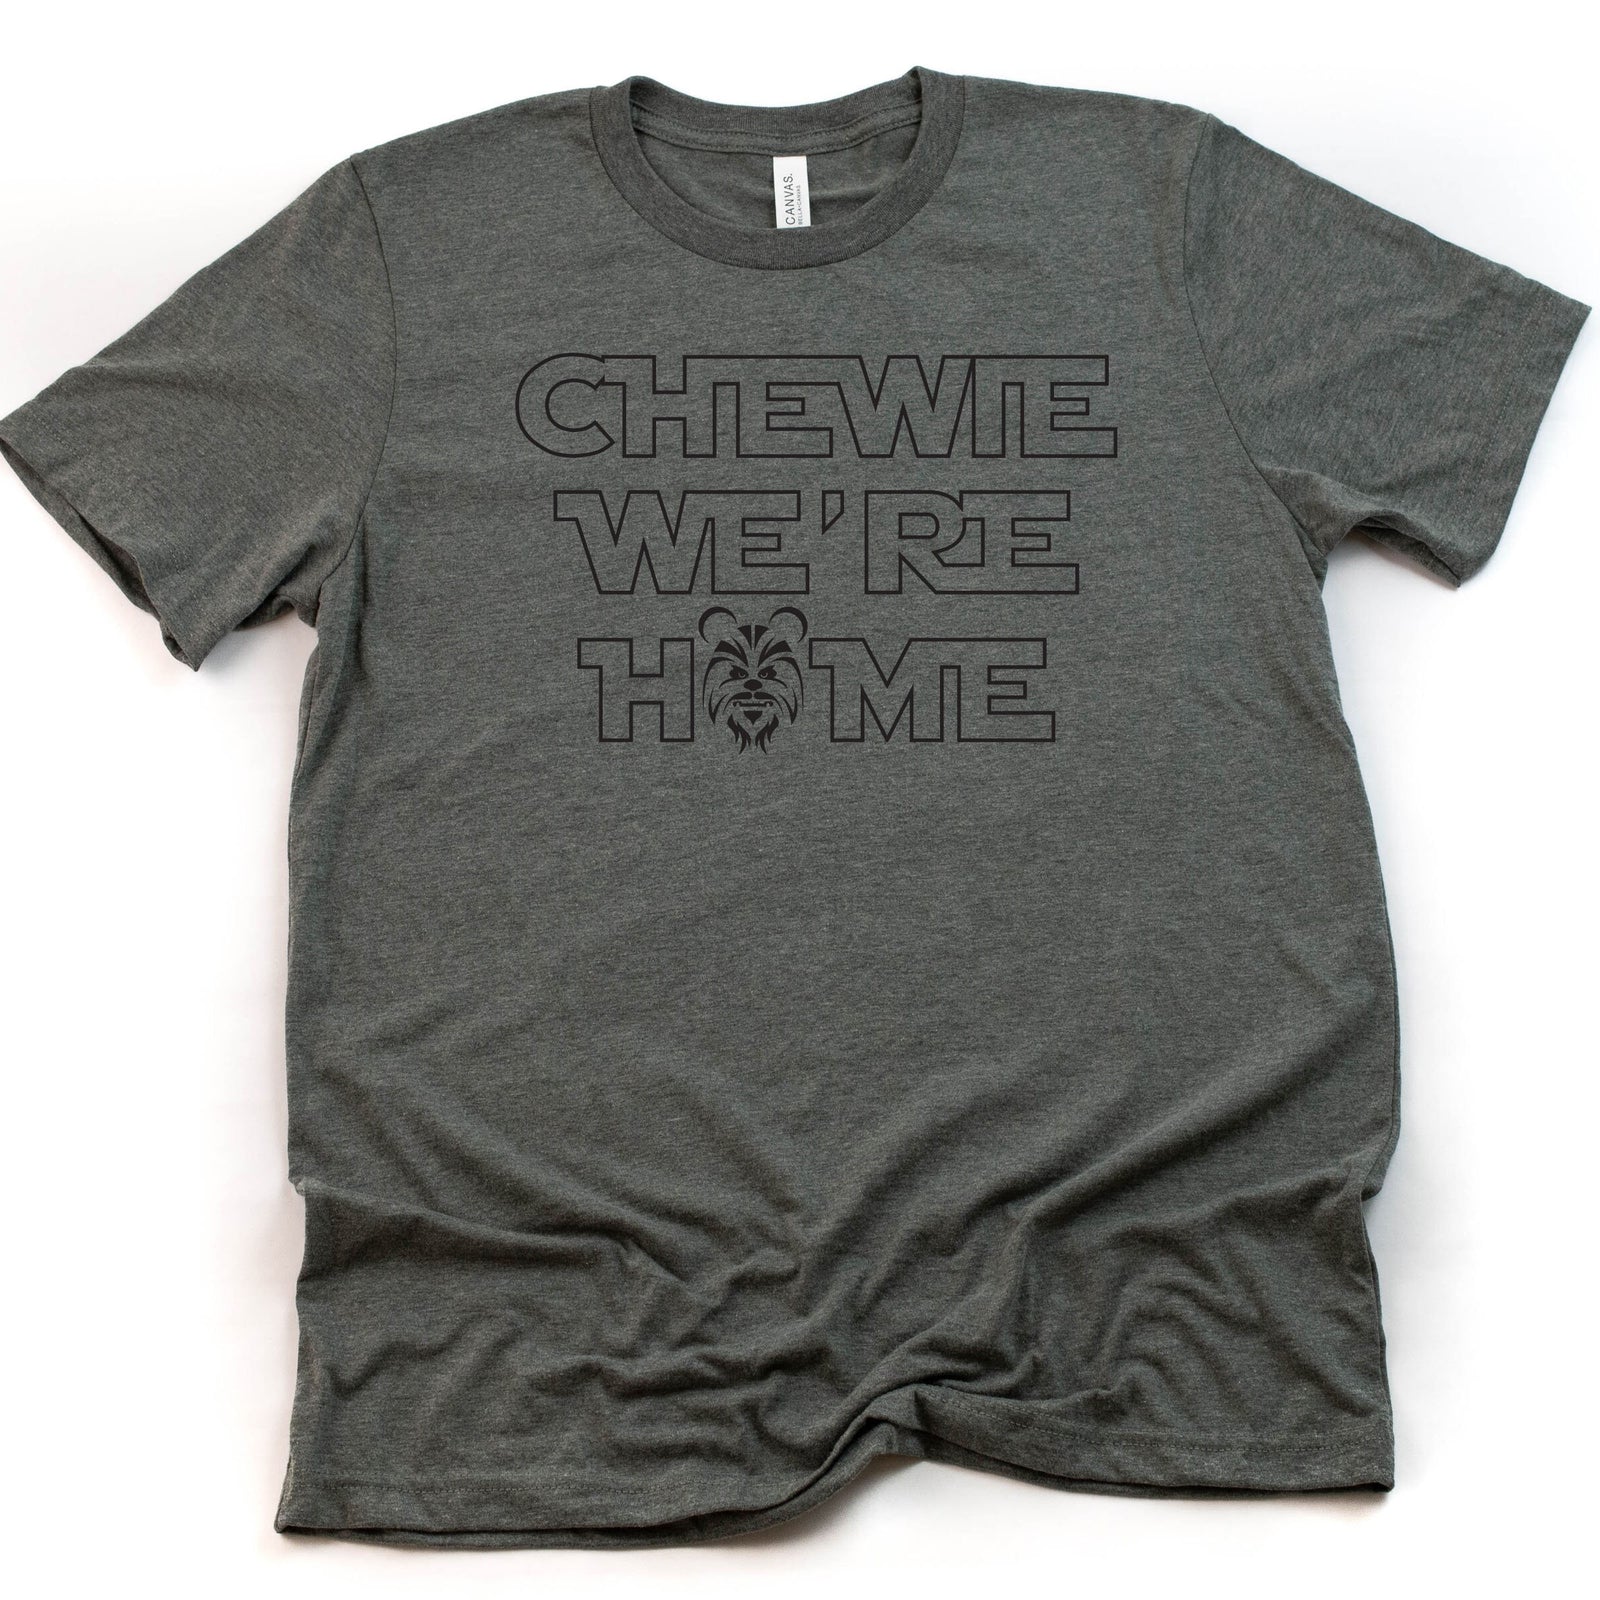 Chewie We Are Home -Darth Vader T Shirt - Disney Star Wars T-shirt - Star Wars Gift Idea - Star Wars Lover T Shirt